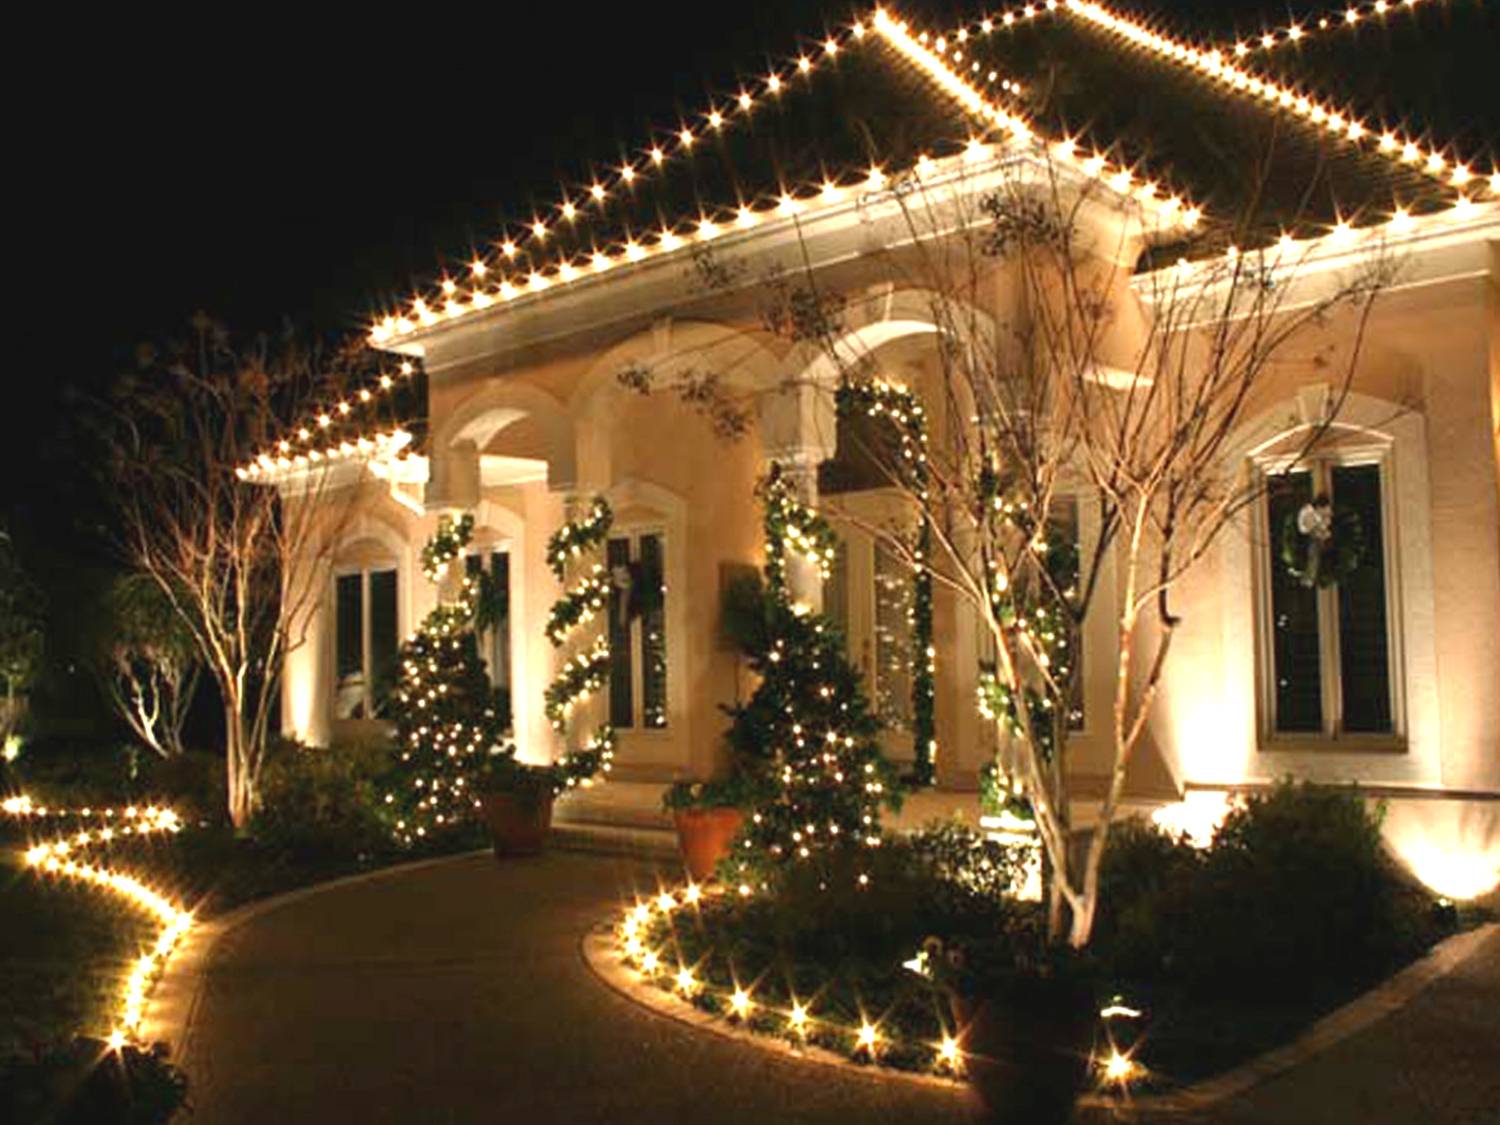 77 Awesome Holiday exterior lighting ideas with Photos Design